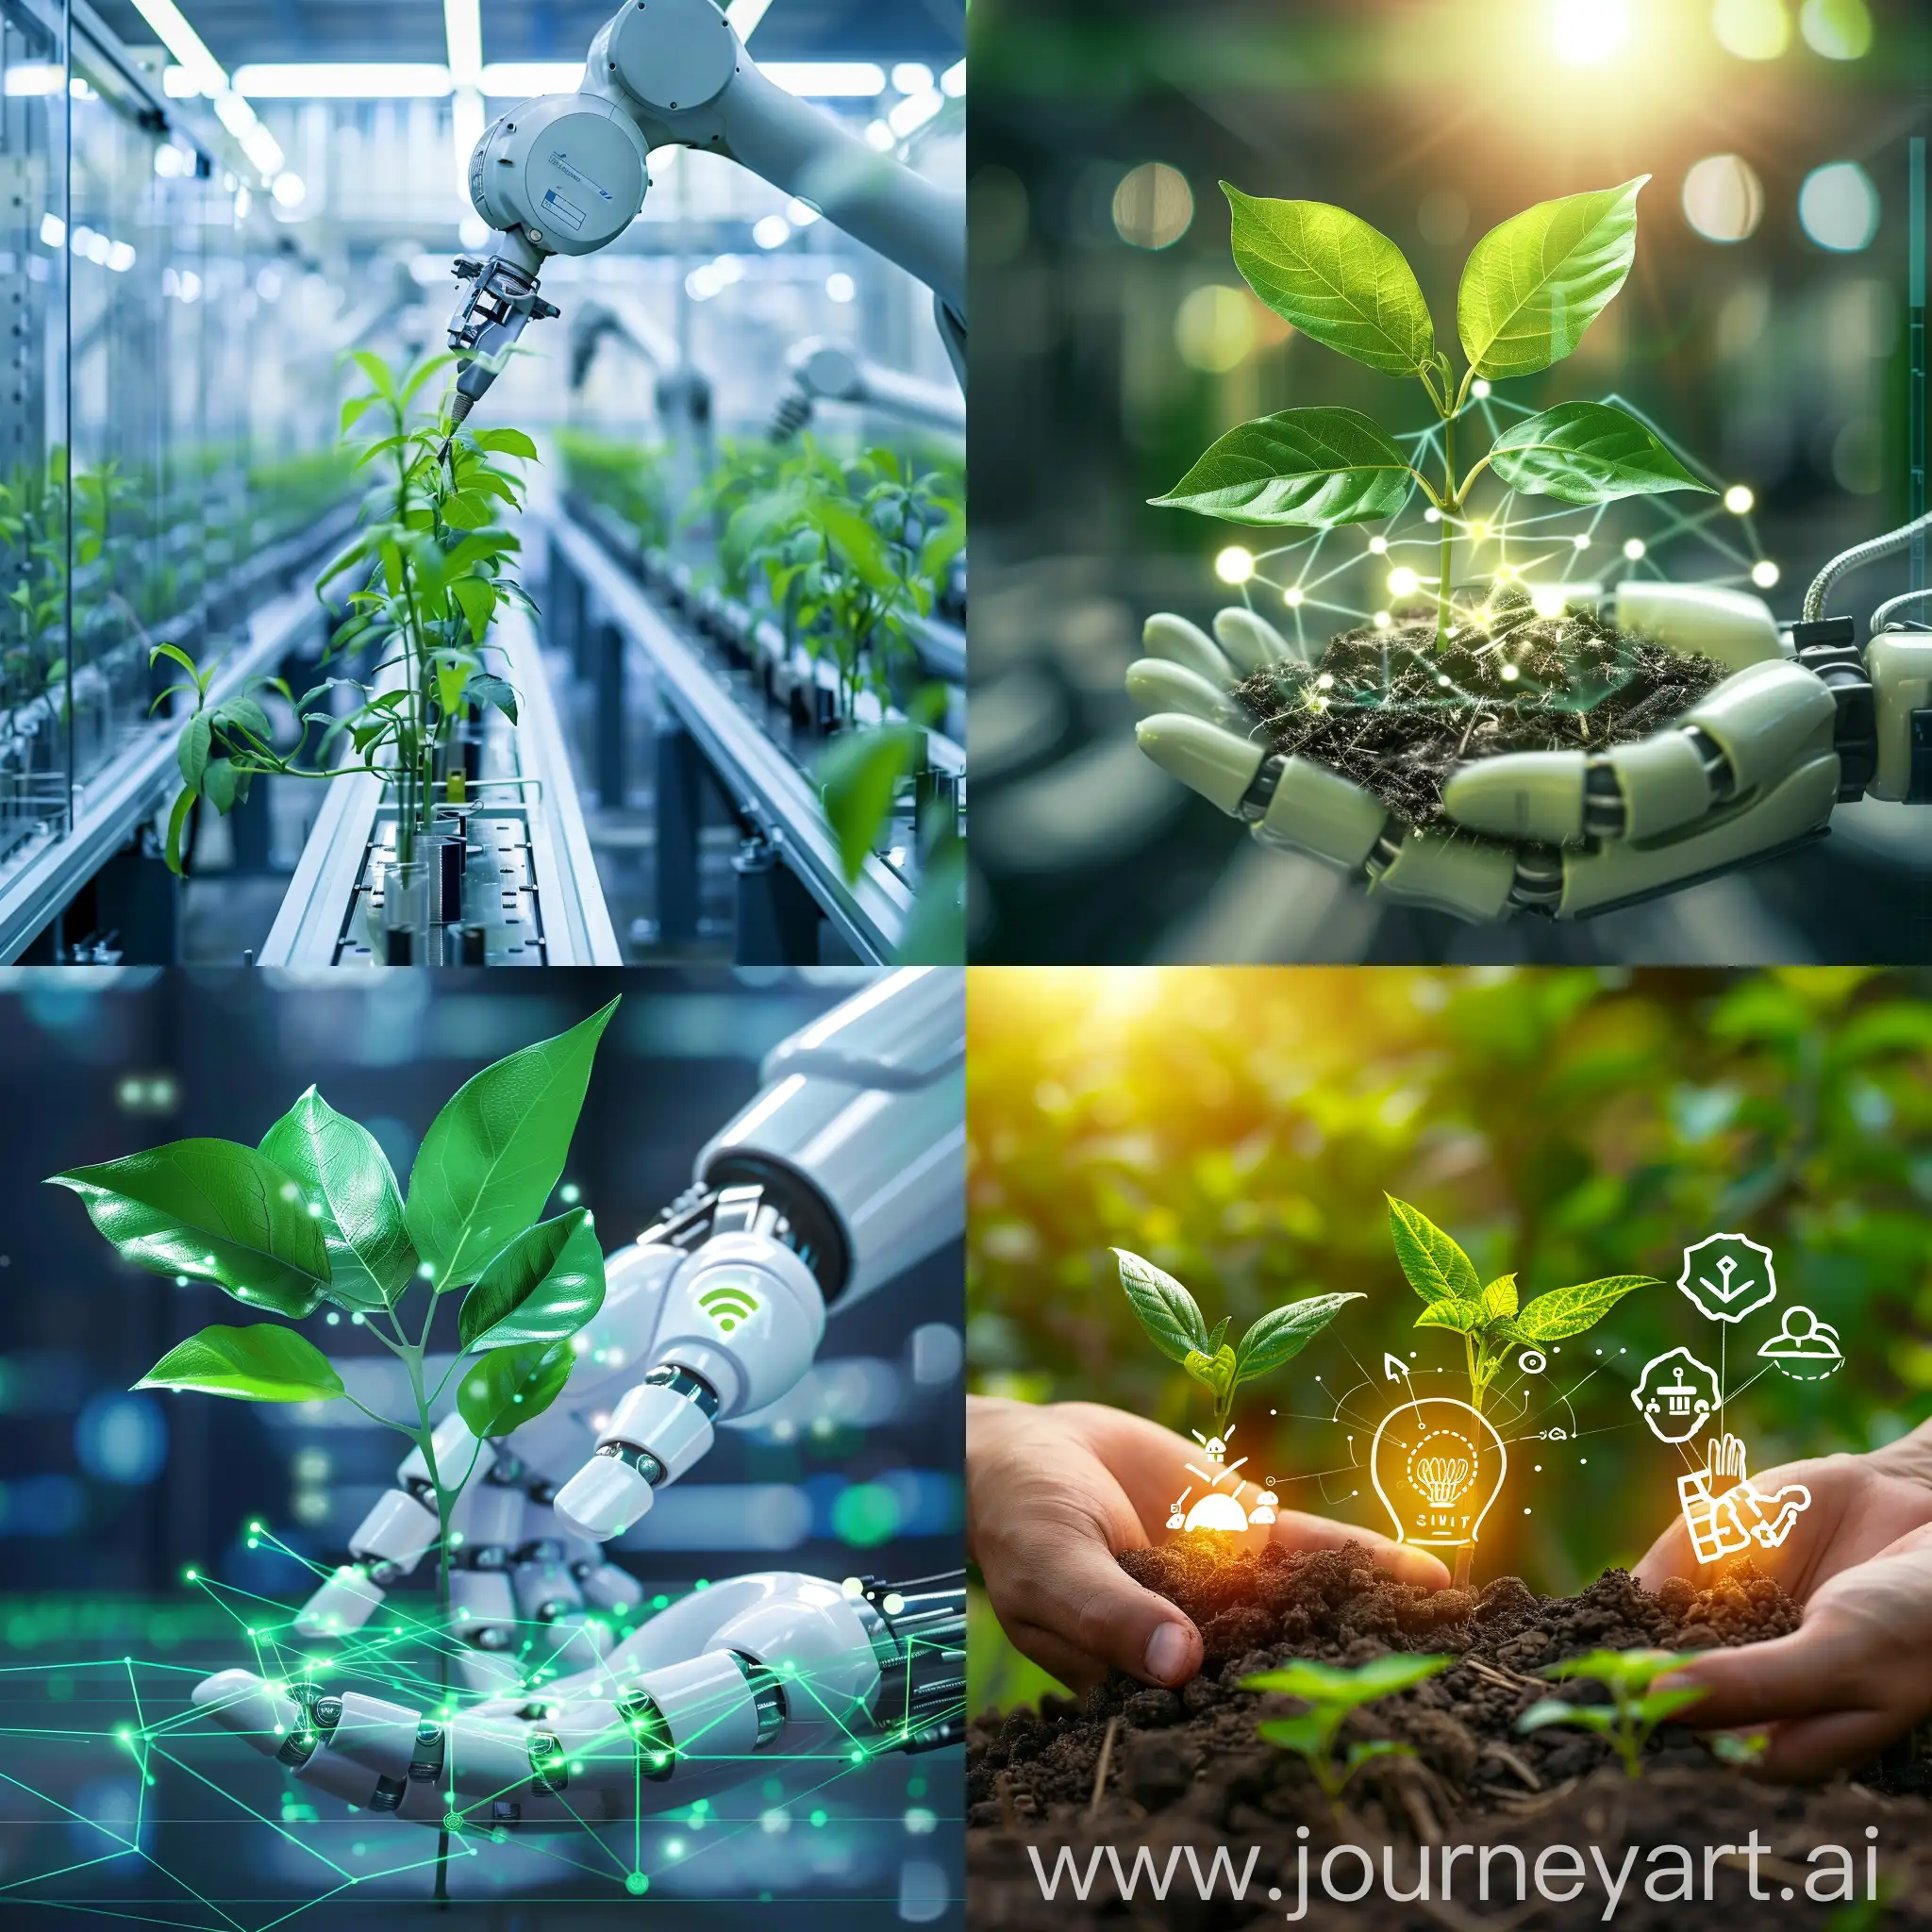 Sustainability-Digitization-Automation-and-Cost-Saving-Culture-in-Action